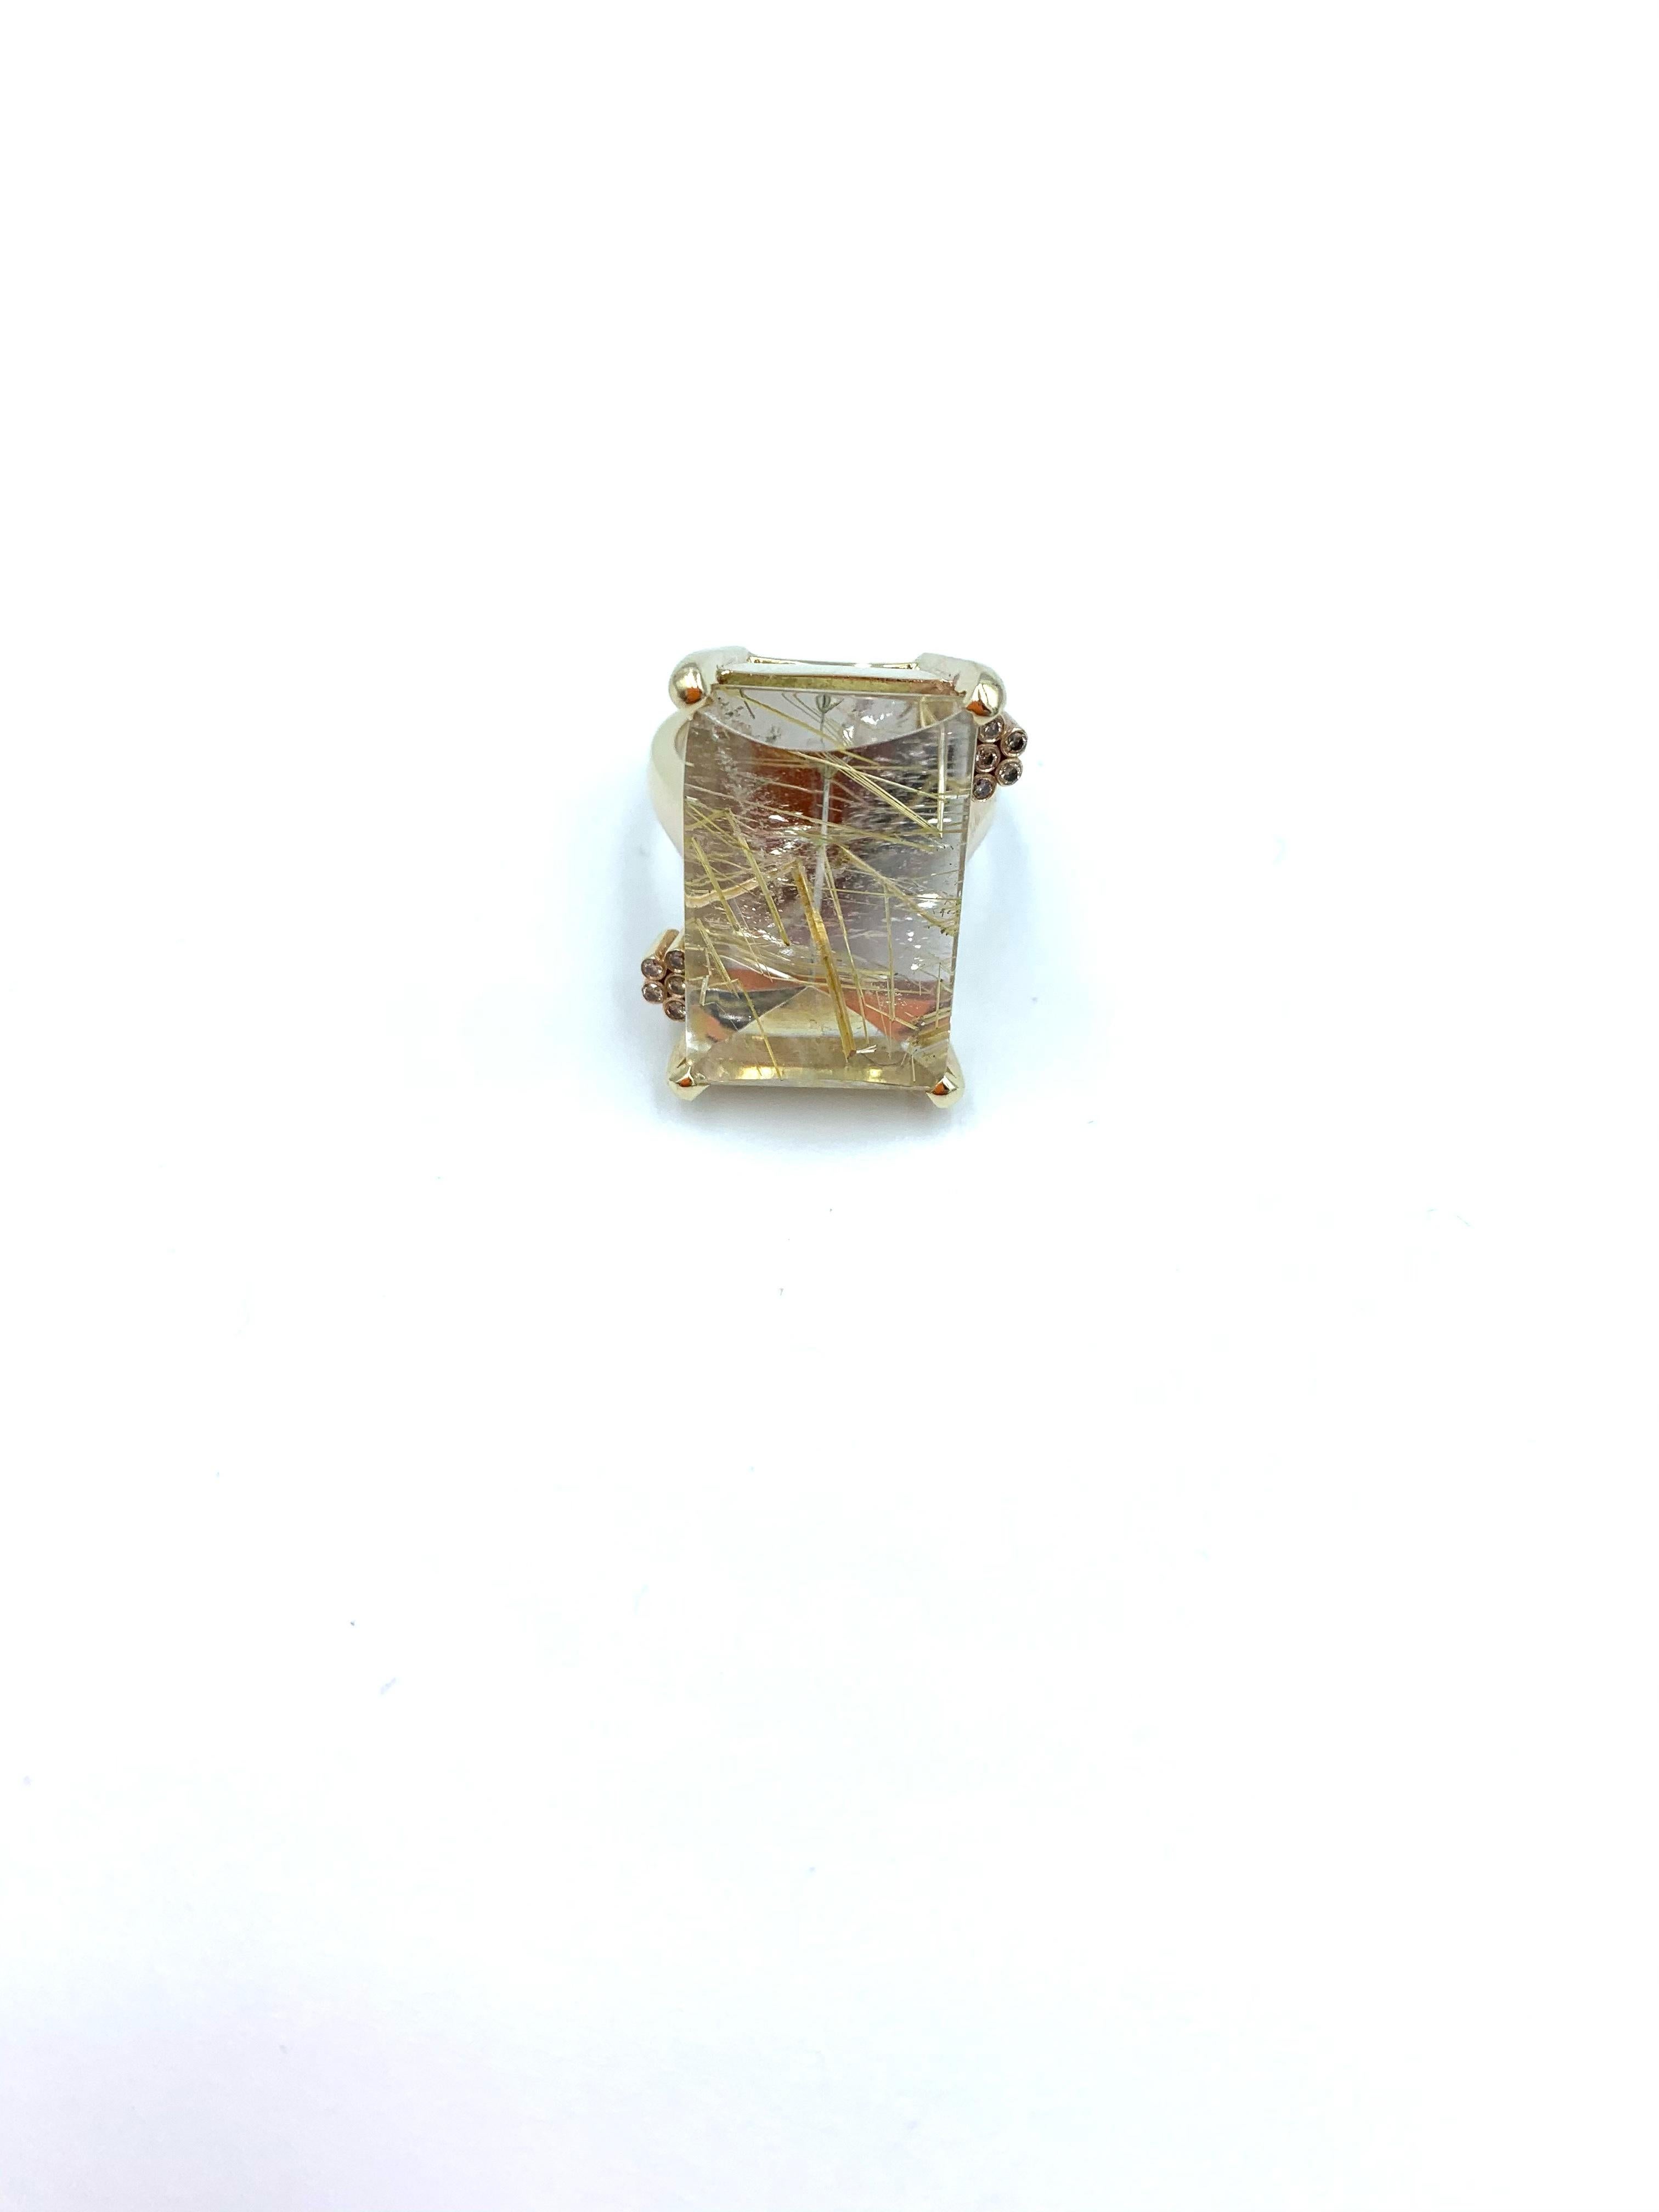 Handmade in 9 carat yellow gold, this stunning ring was created using a 26 carat Rutilated Quartz as it's centrepiece, gemstone prized by its unique inclusions, surrounding it with 5 small diamond accents to each side (approximately .1 carat in